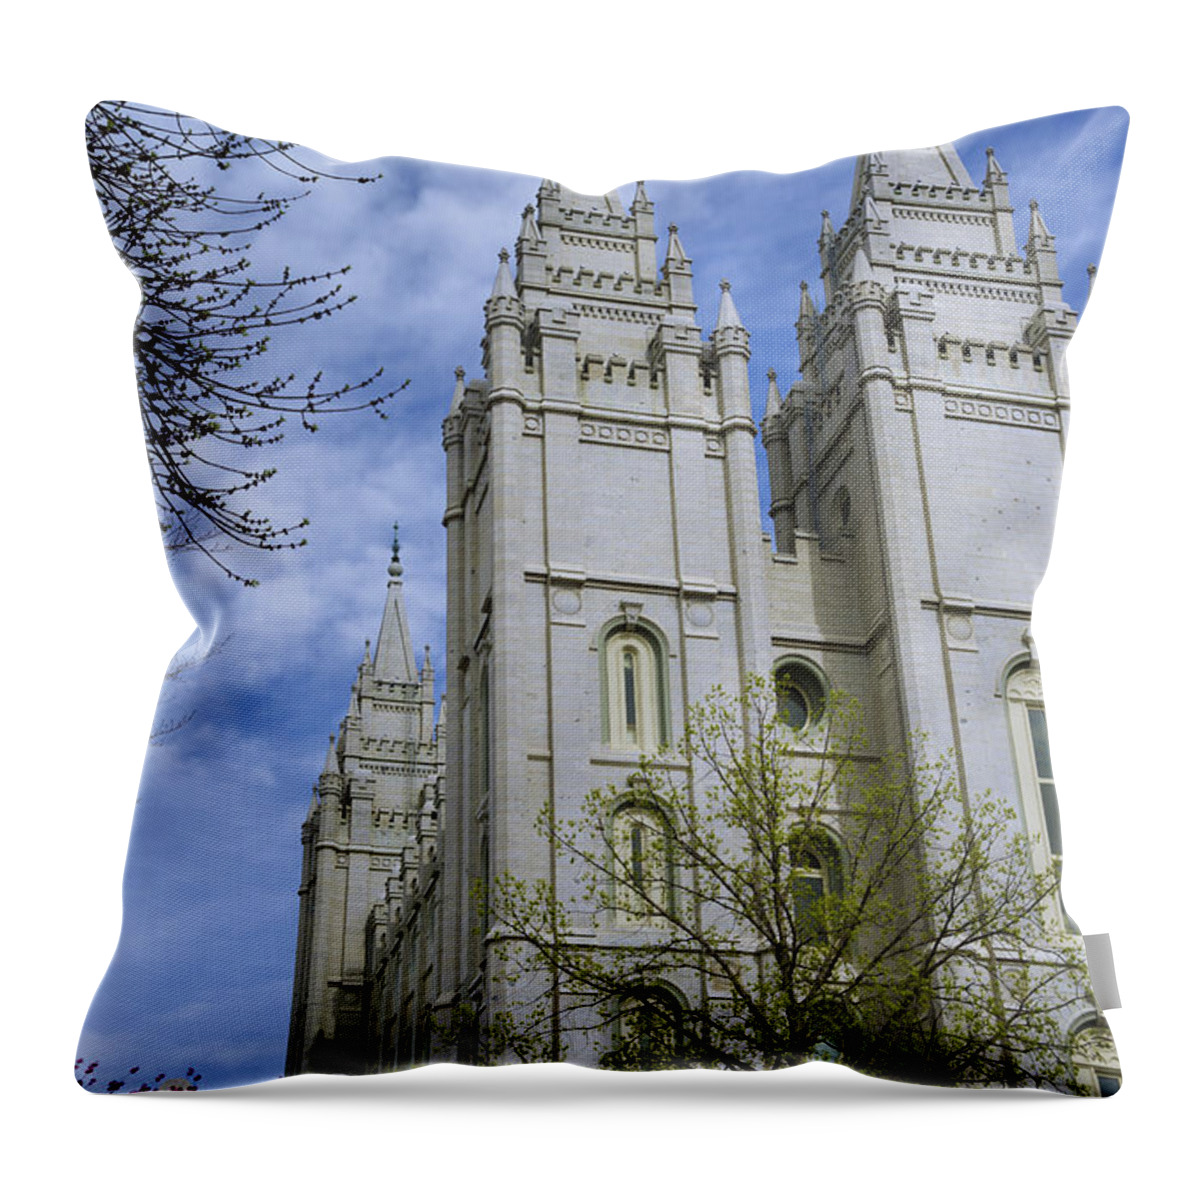 Spring Has Sprung Throw Pillow featuring the photograph Spring Has Sprung by Chad Dutson